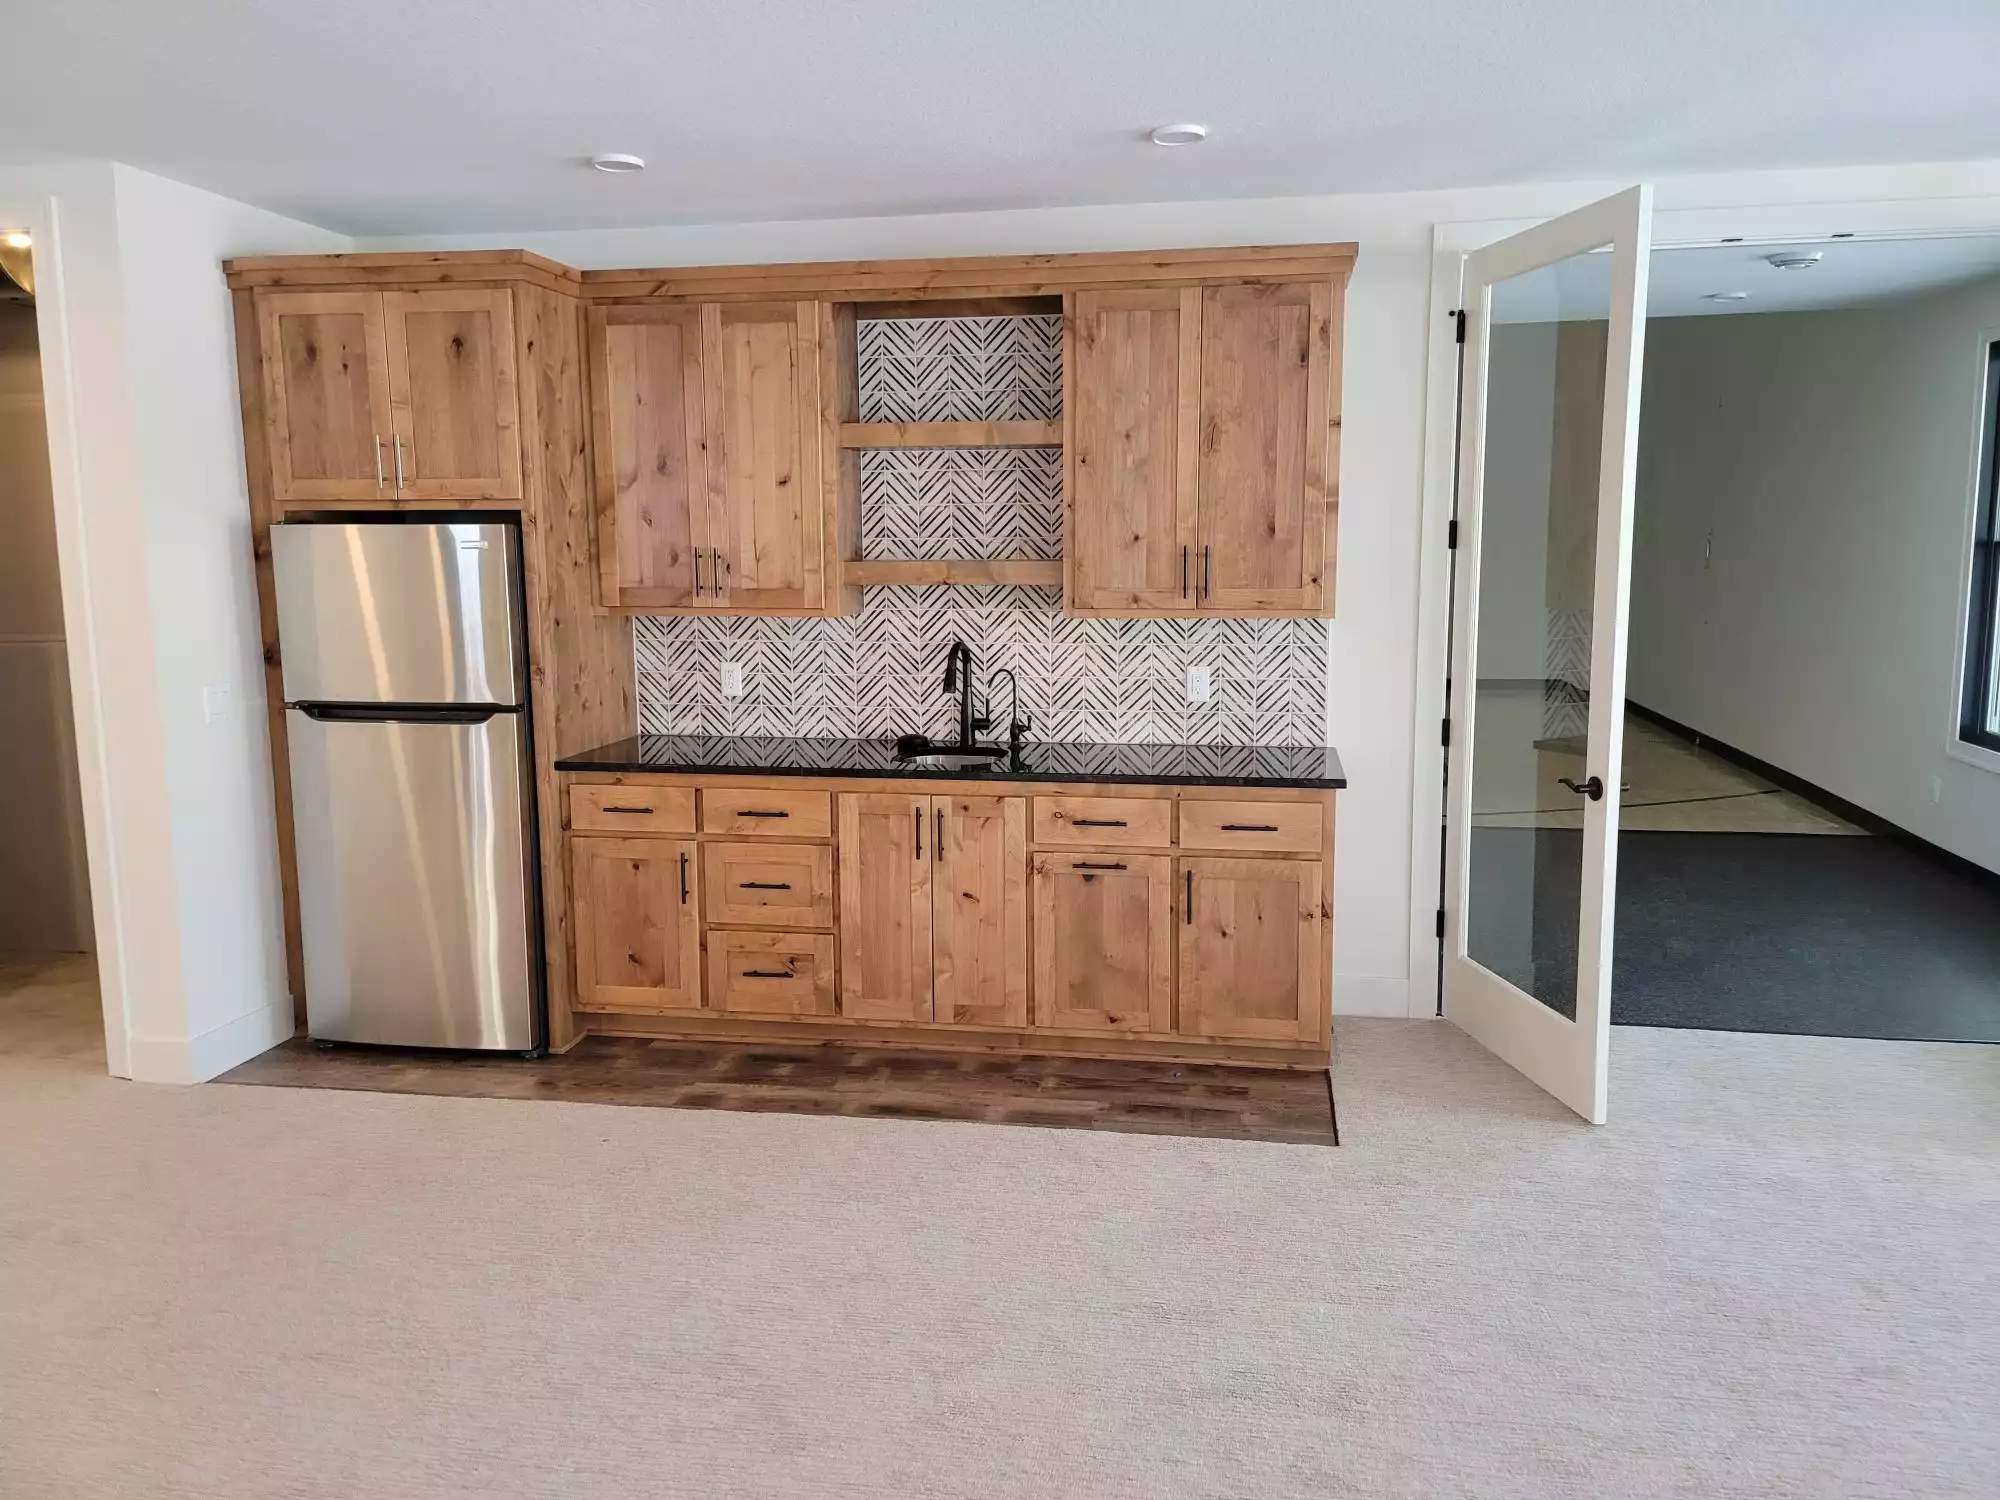 Wood stained cabinet wet bar with black solid counter and tile backsplash